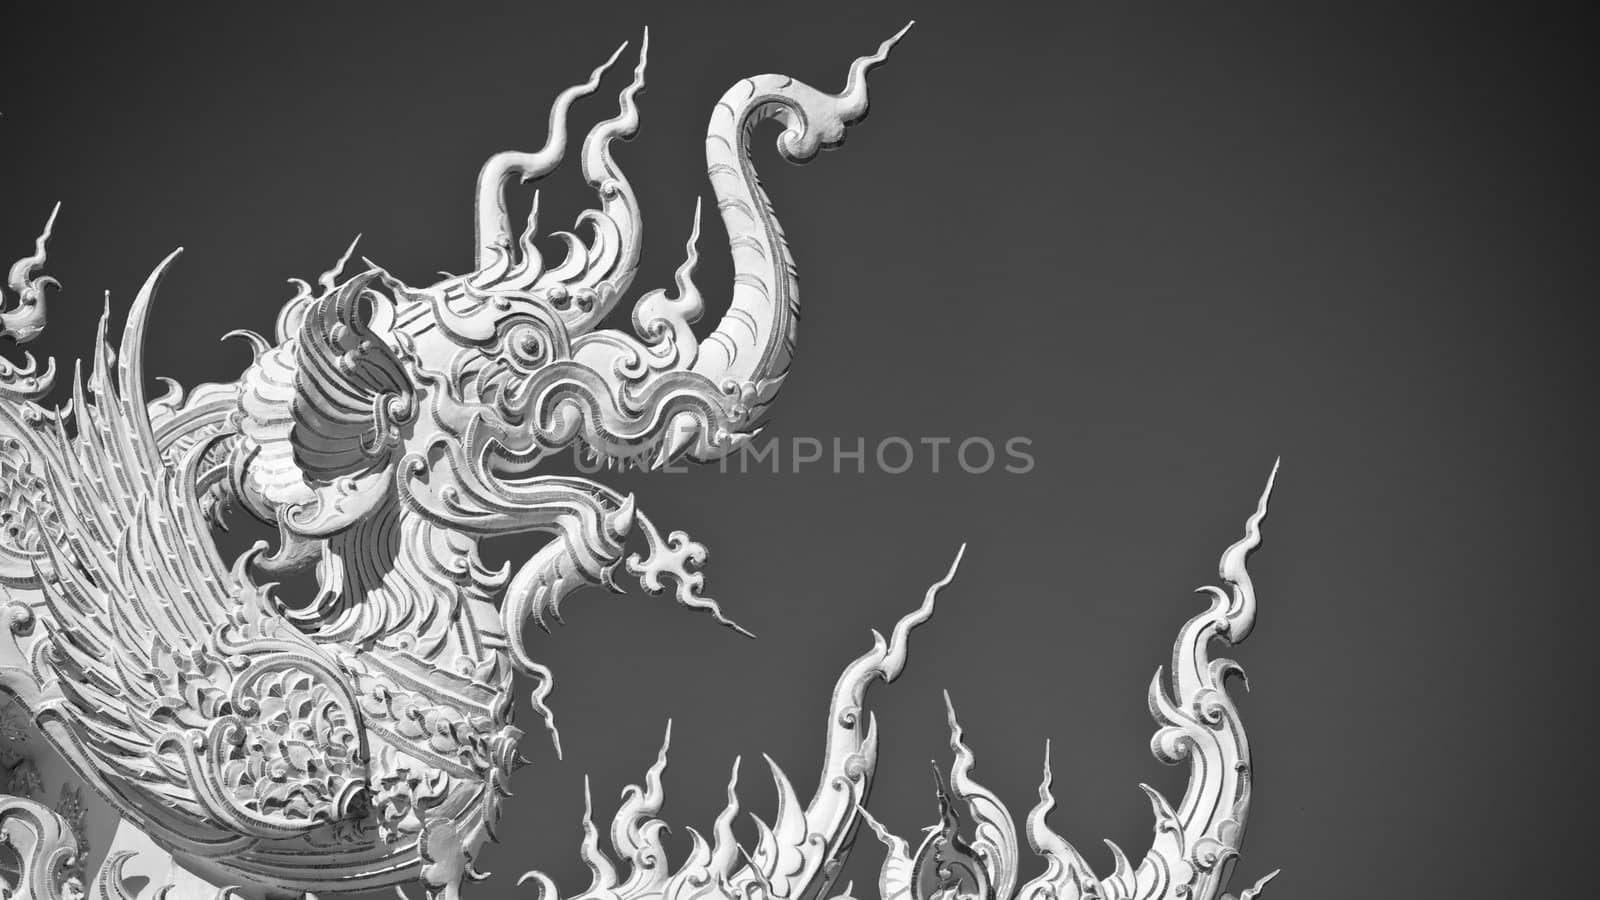 Statue of white dragon in Wat Rong Khun. Wat Rong Khun is a contemporary unconventional Buddhist temple in Chiang Rai, Chiangmai province, Thailand. It is designed in white color.